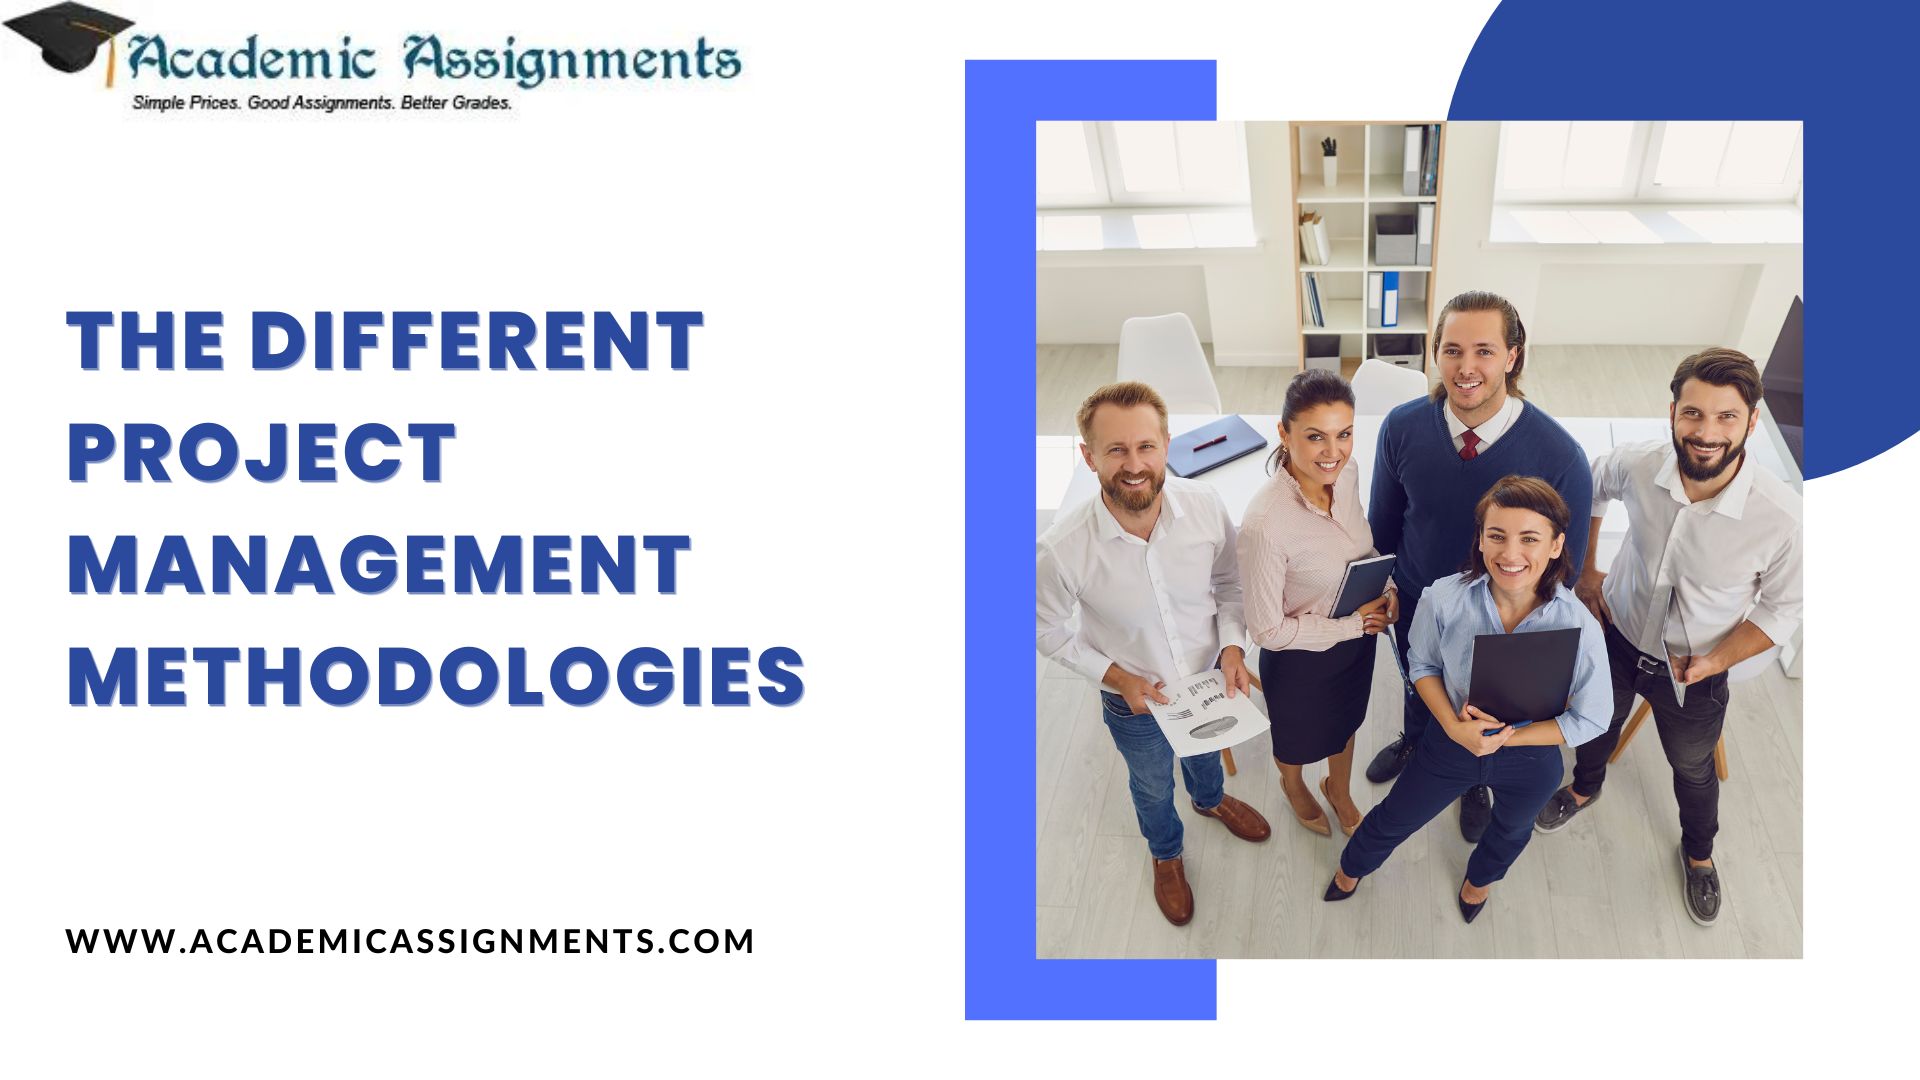 The Different Project Management Methodologies